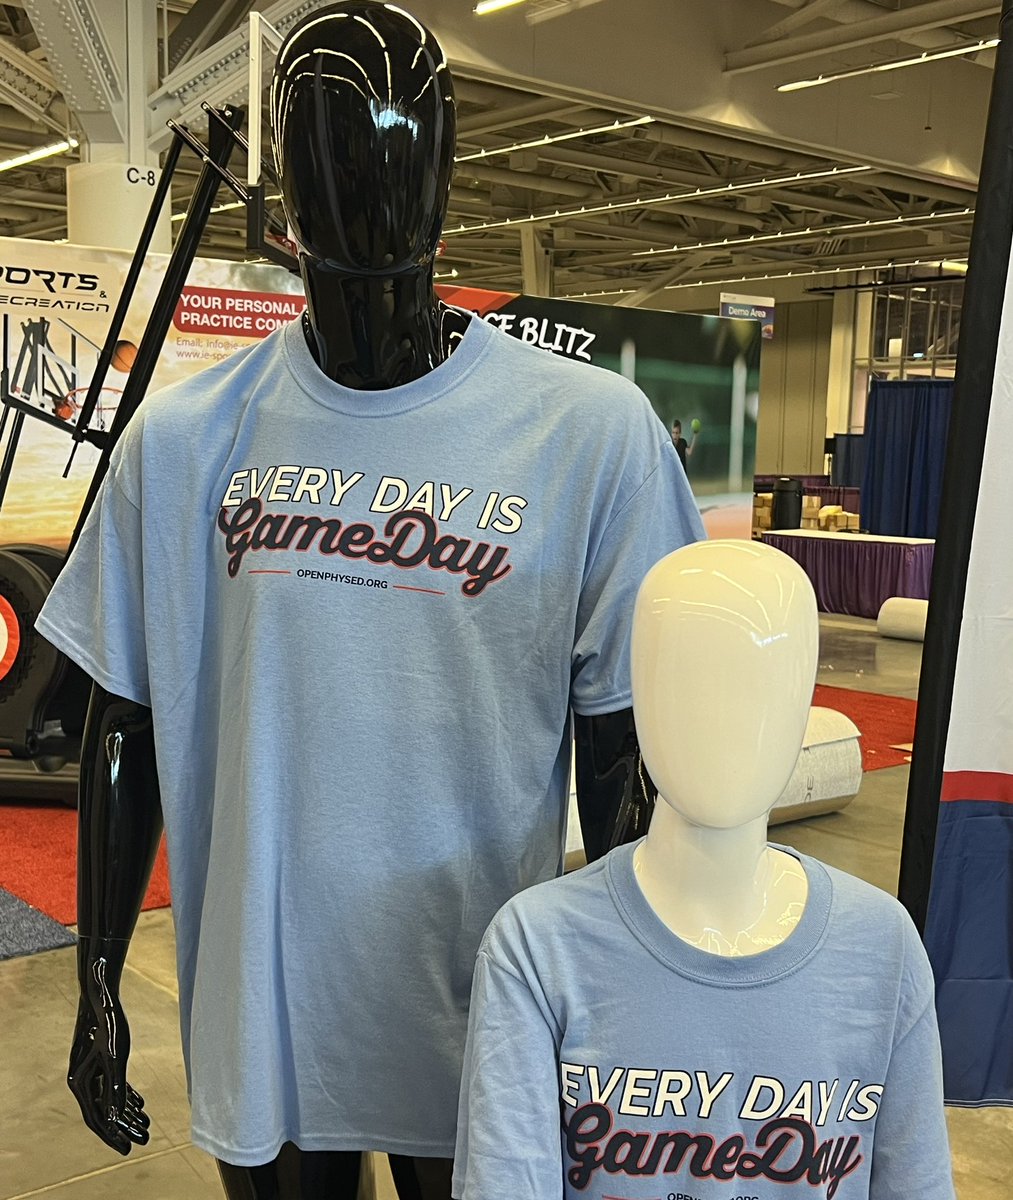 Have you seen our National Trainers in their #everydayisgameday tshirts today at #shapecleveland? Get yours tomorrow at our exhibit booth starting at 9AM while supplies last! #teachershelpingteachers